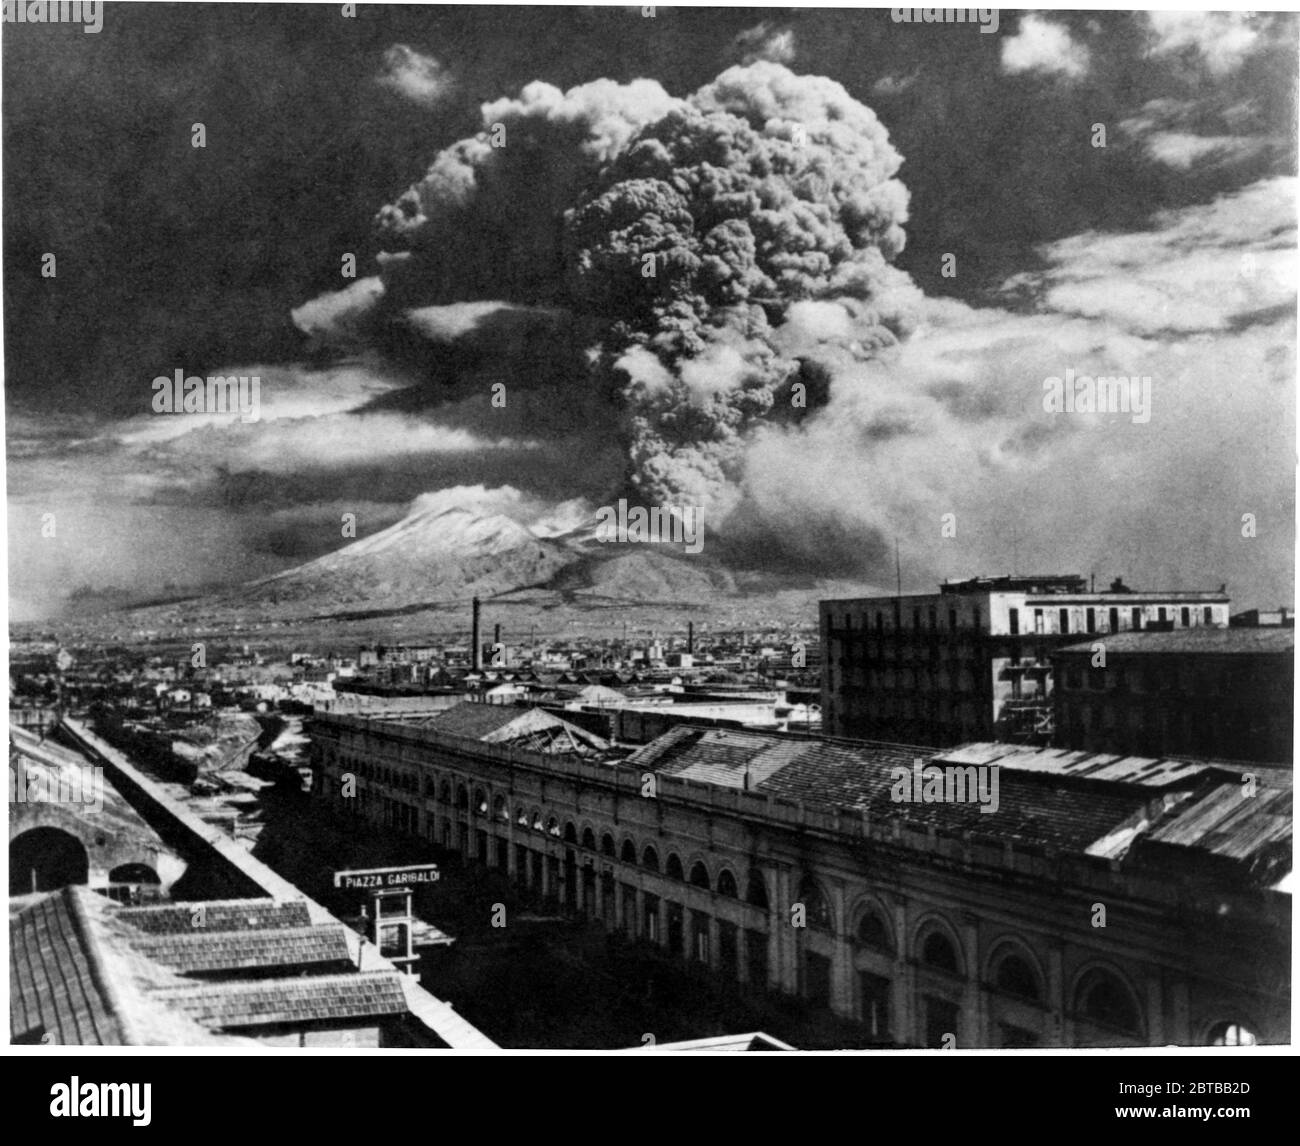 1944 , march, NAPLES , ITALY : The  eruptin of MOUNT VESUVIUS , from 18 to 24 march, during the occupation of U.S. Allieds Force . View from the roof of the Central Train rail station . Photo by OWI Staff photographer , approved by appropriate U.S. Military autority . - Monte VESUVIO - NAPOLI - ITALIA - ERUZIONE VULCANICA - VOLCANO - VULCANO - WW2 - SECONDA GUERRA MONDIALE - 2nd WORLD WAR --- Archivio GBB Stock Photo